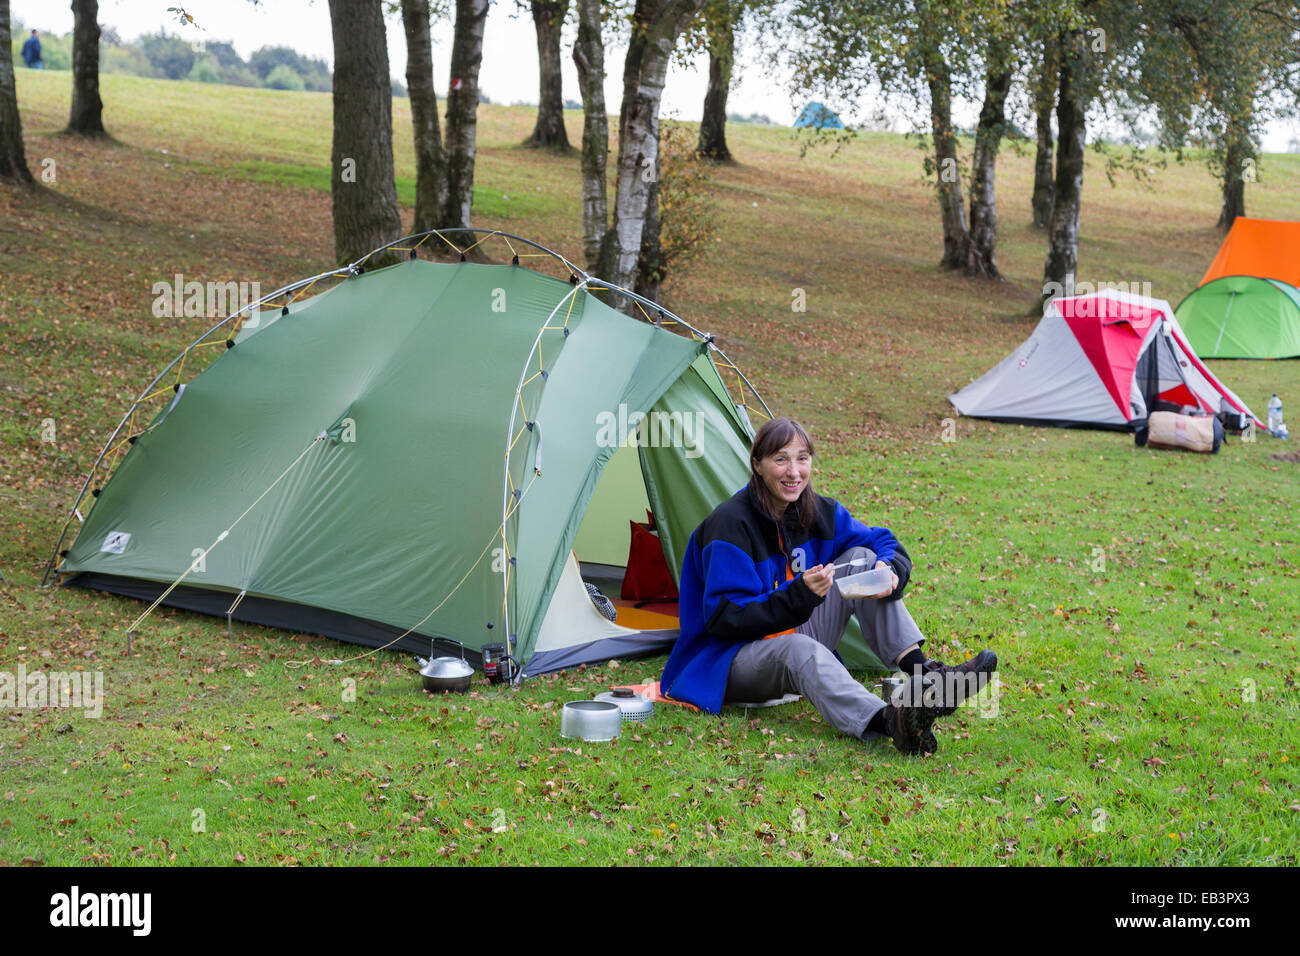 Camper outside tent eating, UK Stock Photo